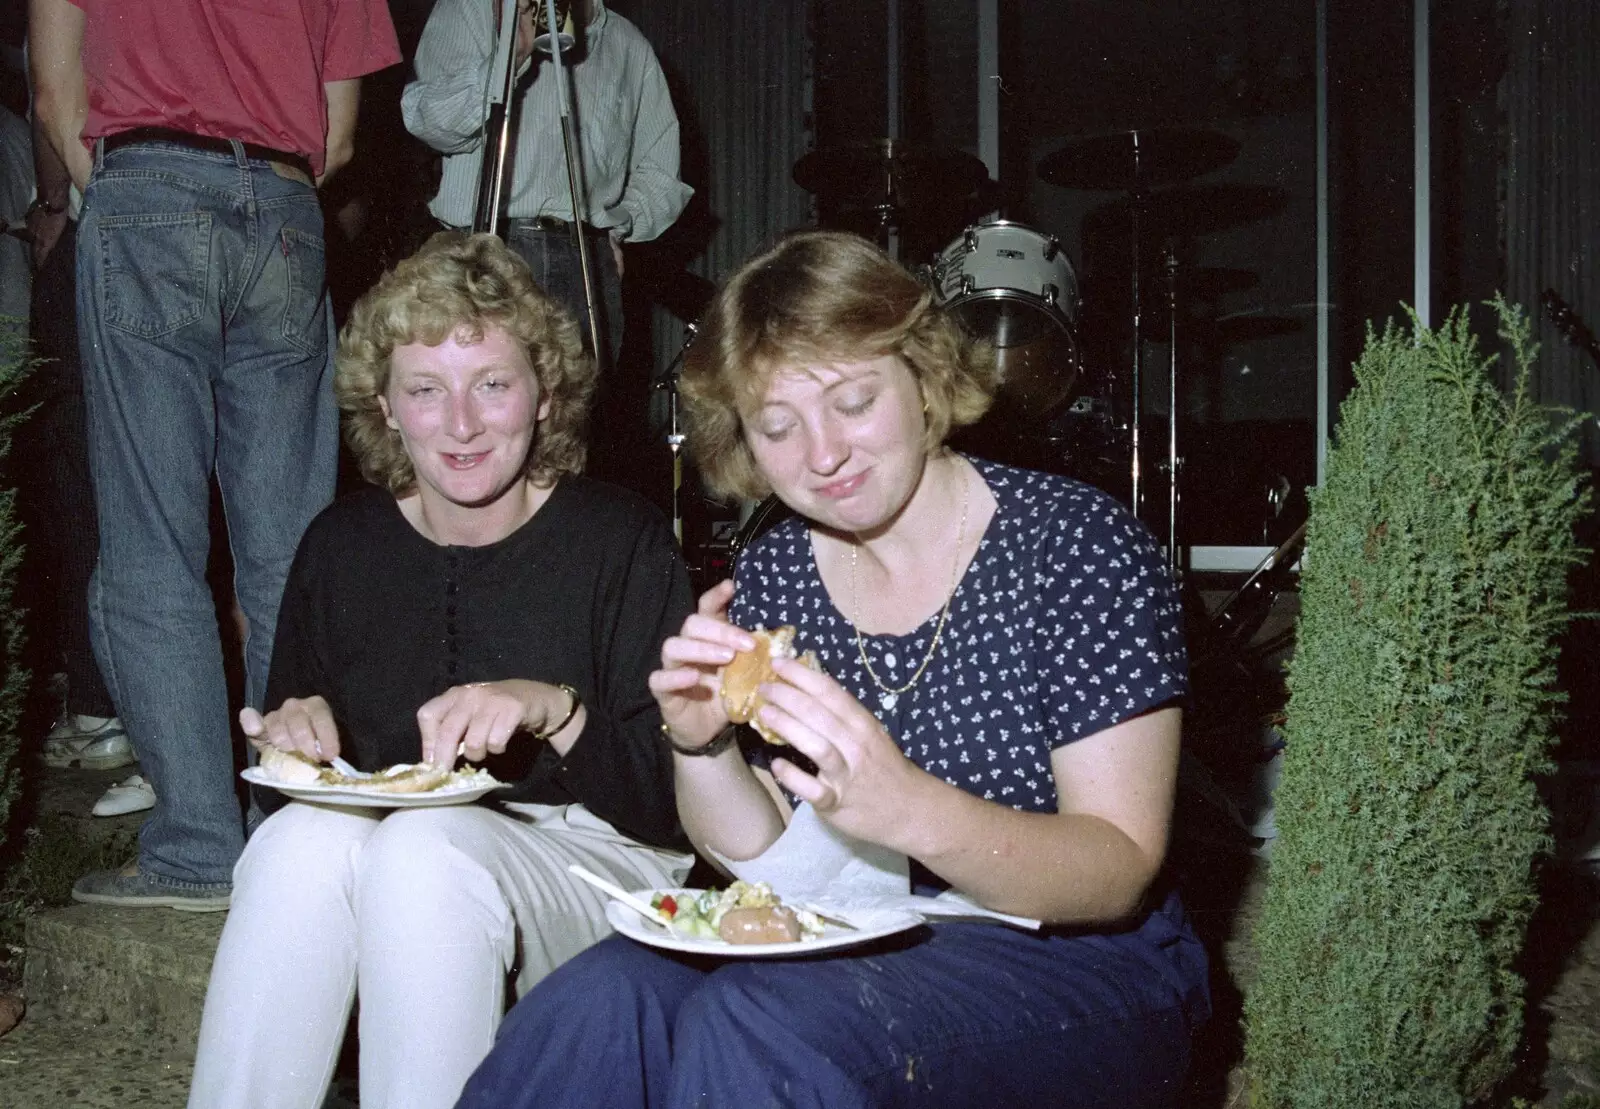 Partially-cooked barbeque sausages are eaten, from Chris and Phil's Party, Hordle, Hampshire - 6th September 1989